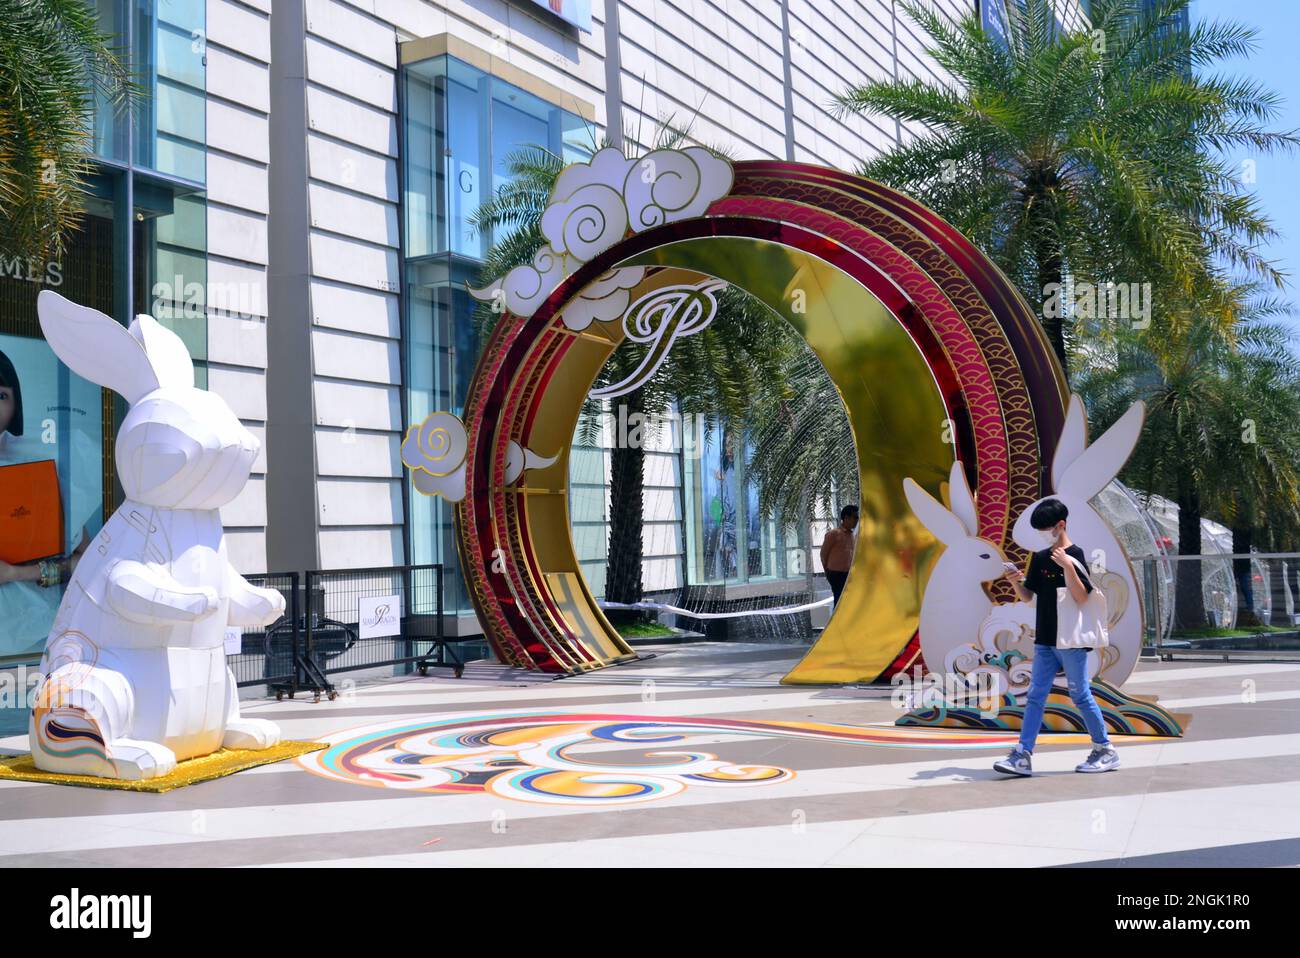 A person walks past a Chinese new year display featuring statues of rabbits and a colourful arch outside the Siam Paragon shopping centre or mall, Bangkok, Thailand, Asia. According to the Chinese Zodiac, 2023 is the Year of the Rabbit. Stock Photo